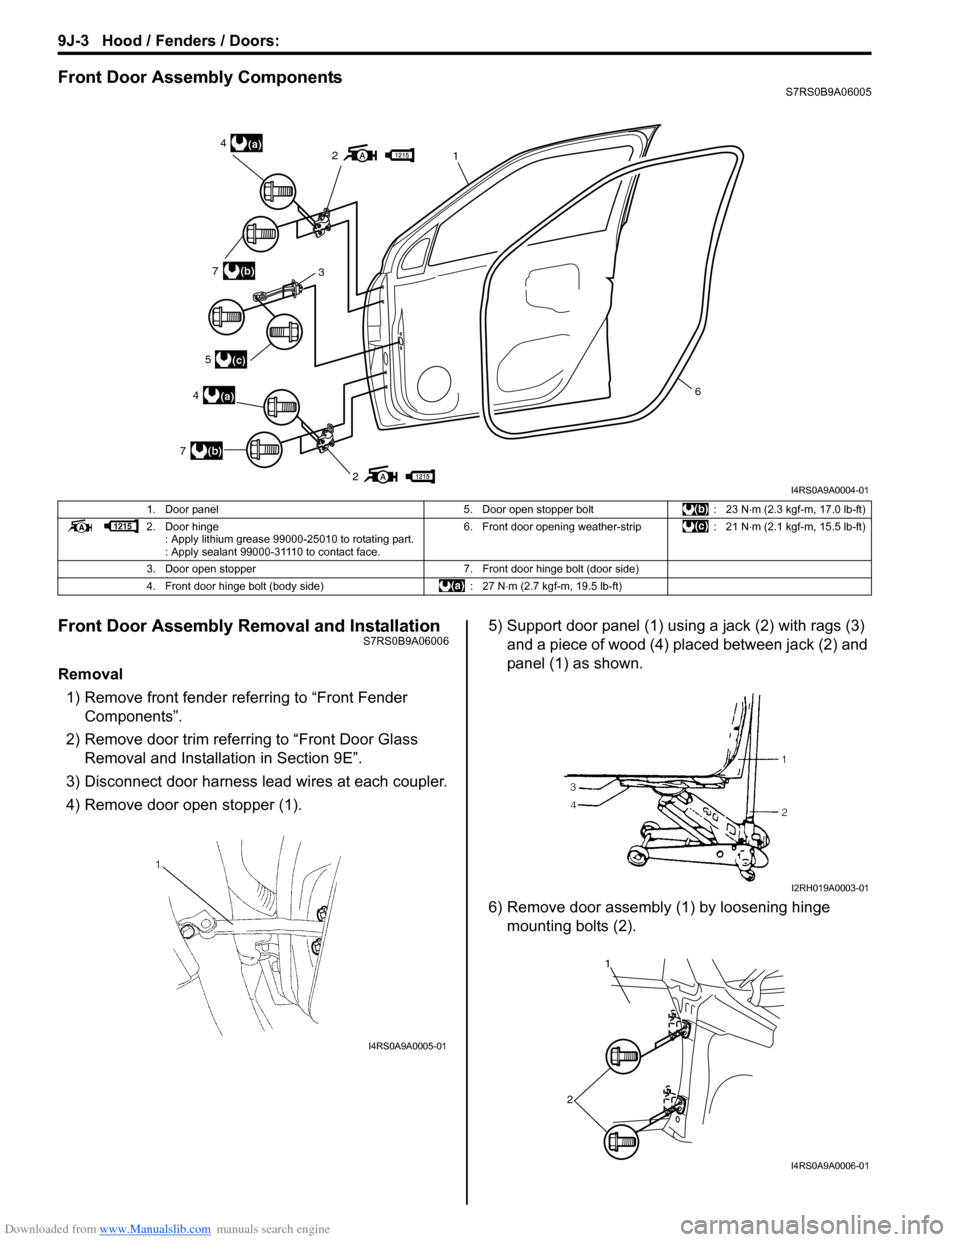 SUZUKI SWIFT 2005 2.G Service Workshop Manual Downloaded from www.Manualslib.com manuals search engine 9J-3 Hood / Fenders / Doors: 
Front Door Assembly ComponentsS7RS0B9A06005
Front Door Assembly Removal and InstallationS7RS0B9A06006
Removal1) R